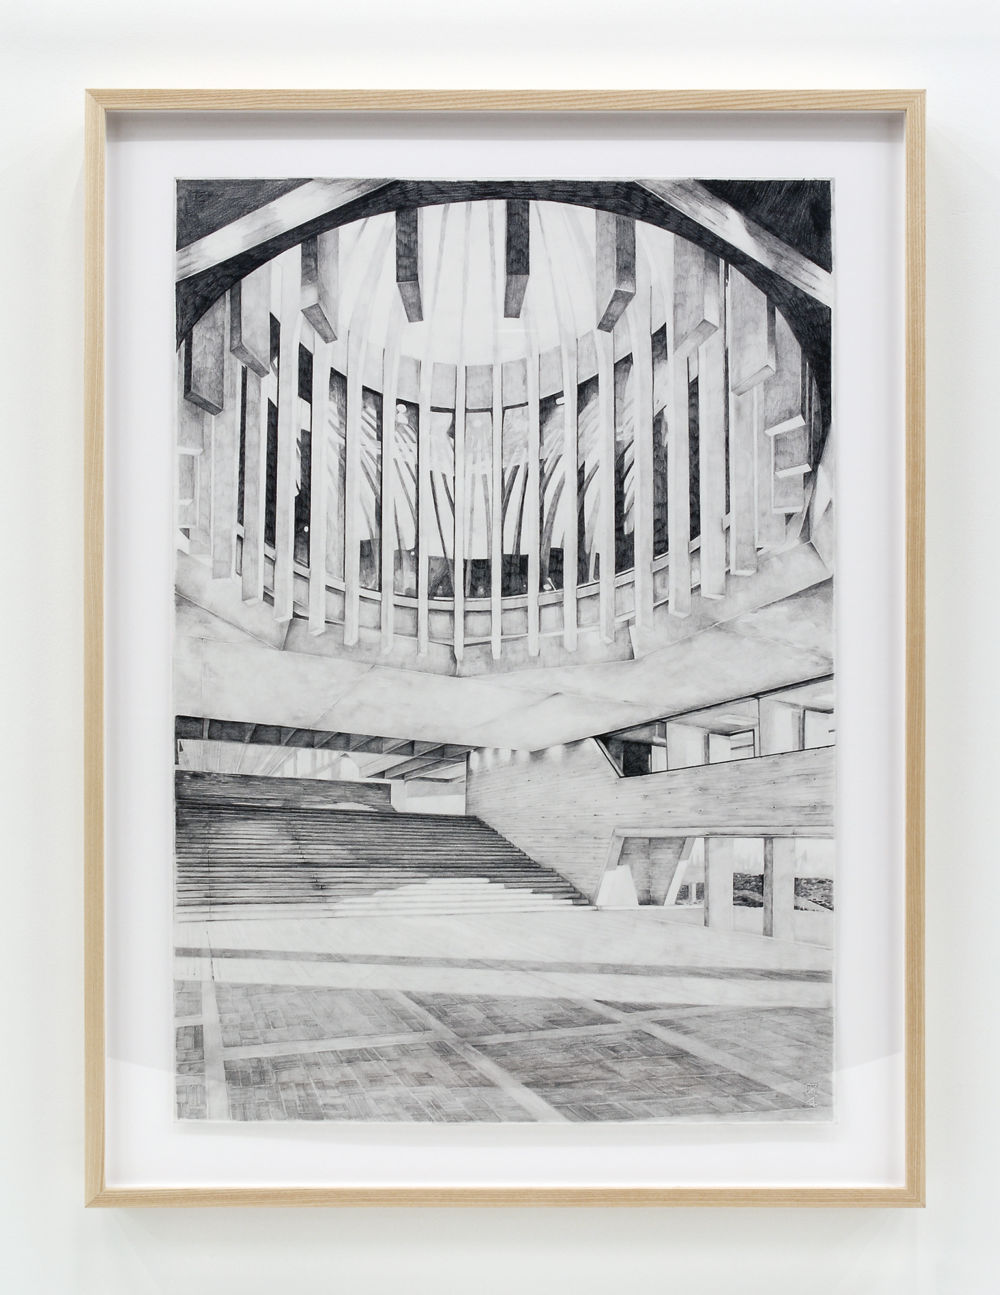 Alex Morrison, The Poetics of Grey (No. 12), 2007, graphite on paper, 46 x 35 in. (118 x 88 cm) by 